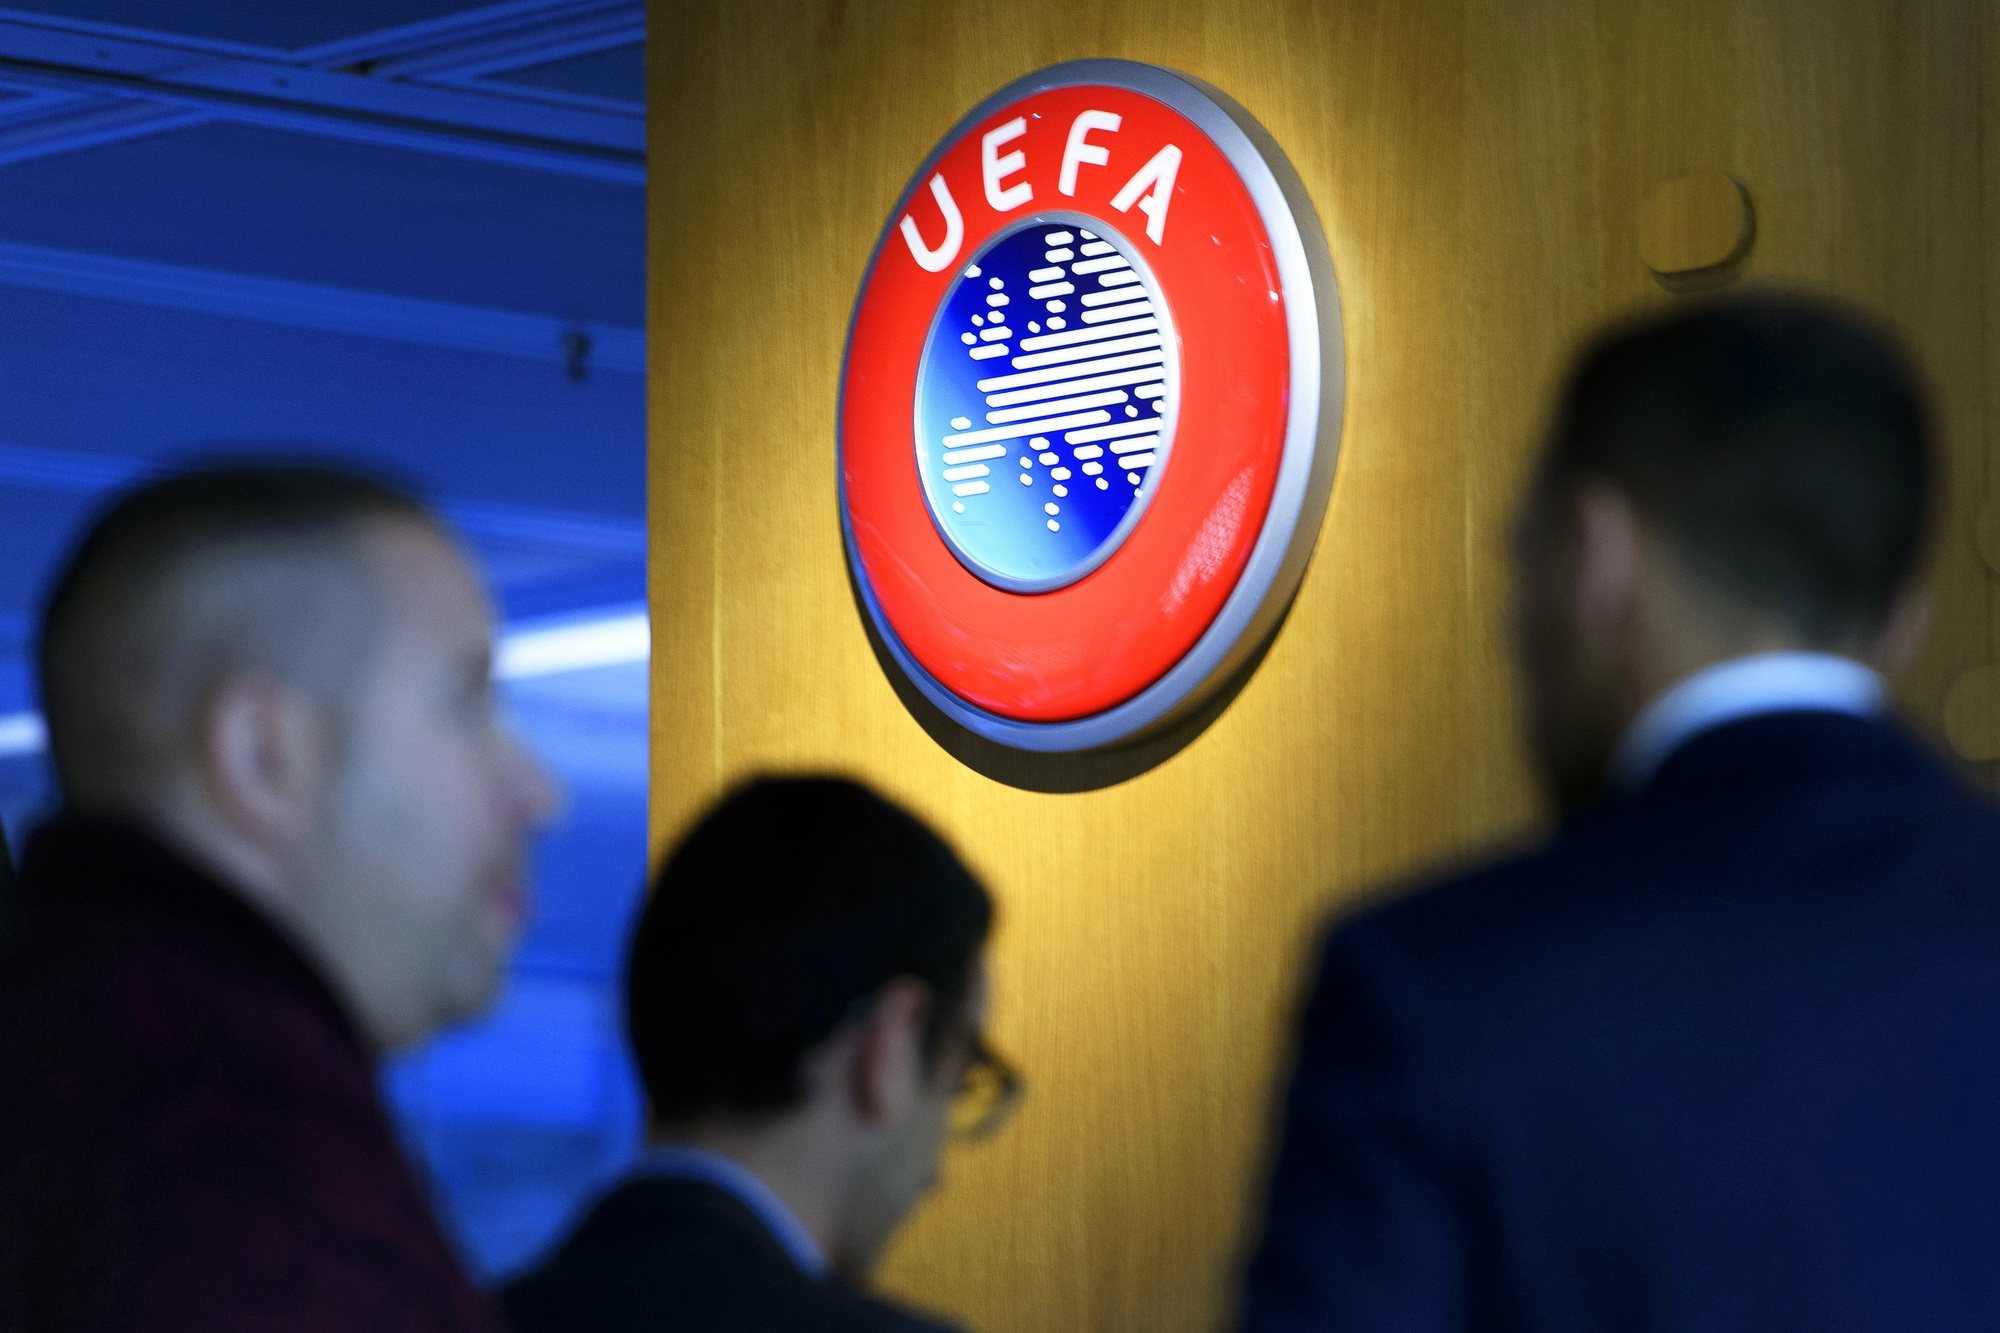 epa08487680 (FILE) - The UEFA logo on display after the meeting of the UEFA Executive Committee at the UEFA headquarters in Nyon, Switzerland, 07 December 2017 (re-issued on 16 June 2020). Lisbon&#039;s Estadio da Luz is expected to host the 2020 UEFA Champions League final in a decision by the UEFA executive committee set to be announced on 17 June 2020.  EPA/LAURENT GILLIERON *** Local Caption *** 55993944